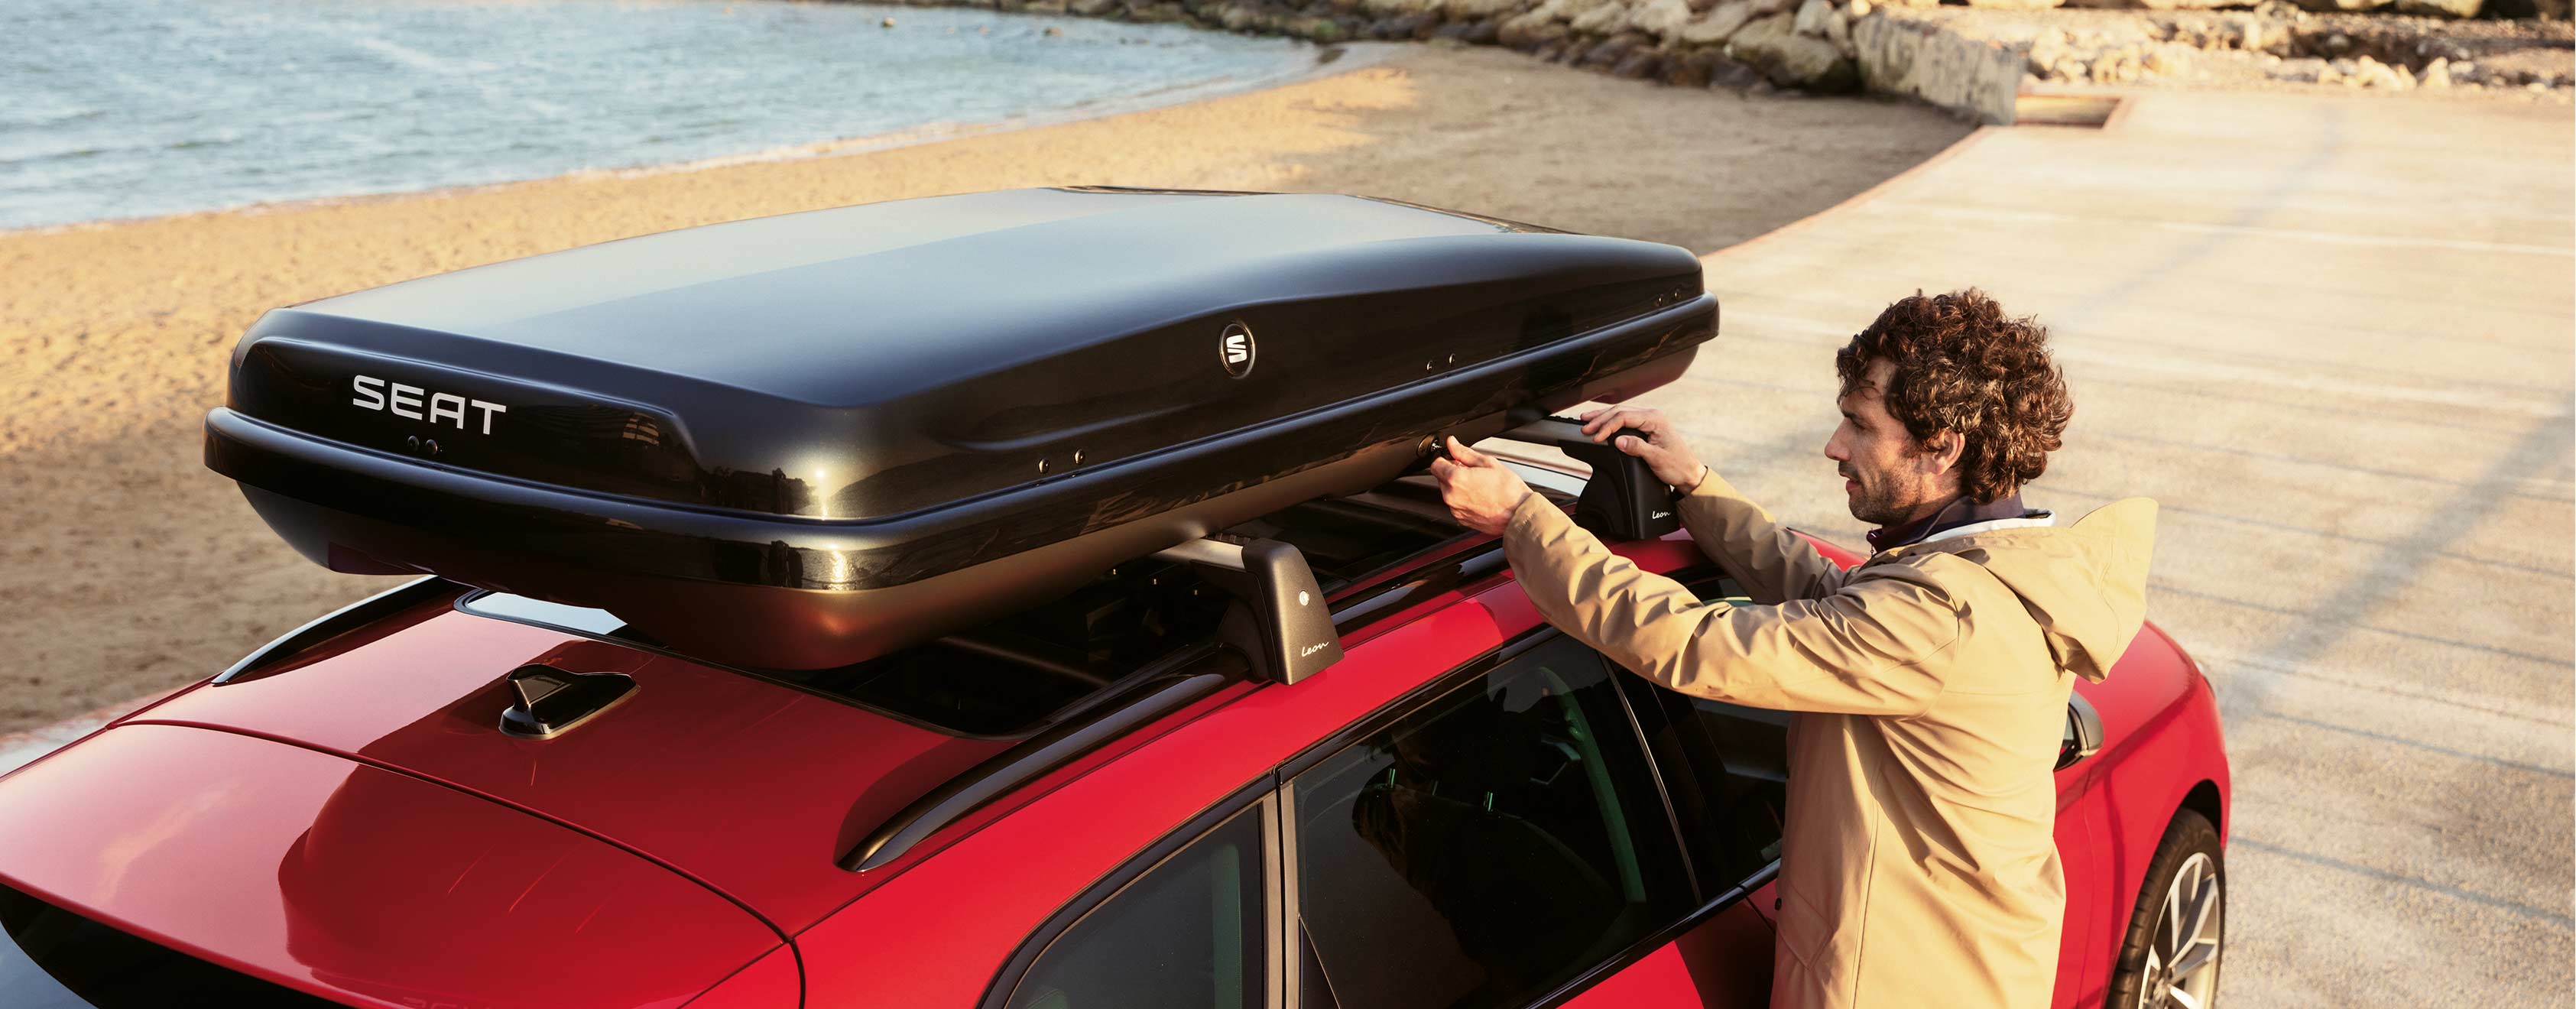 seat leon accessories roof box with 400 or 600 litre capacity options